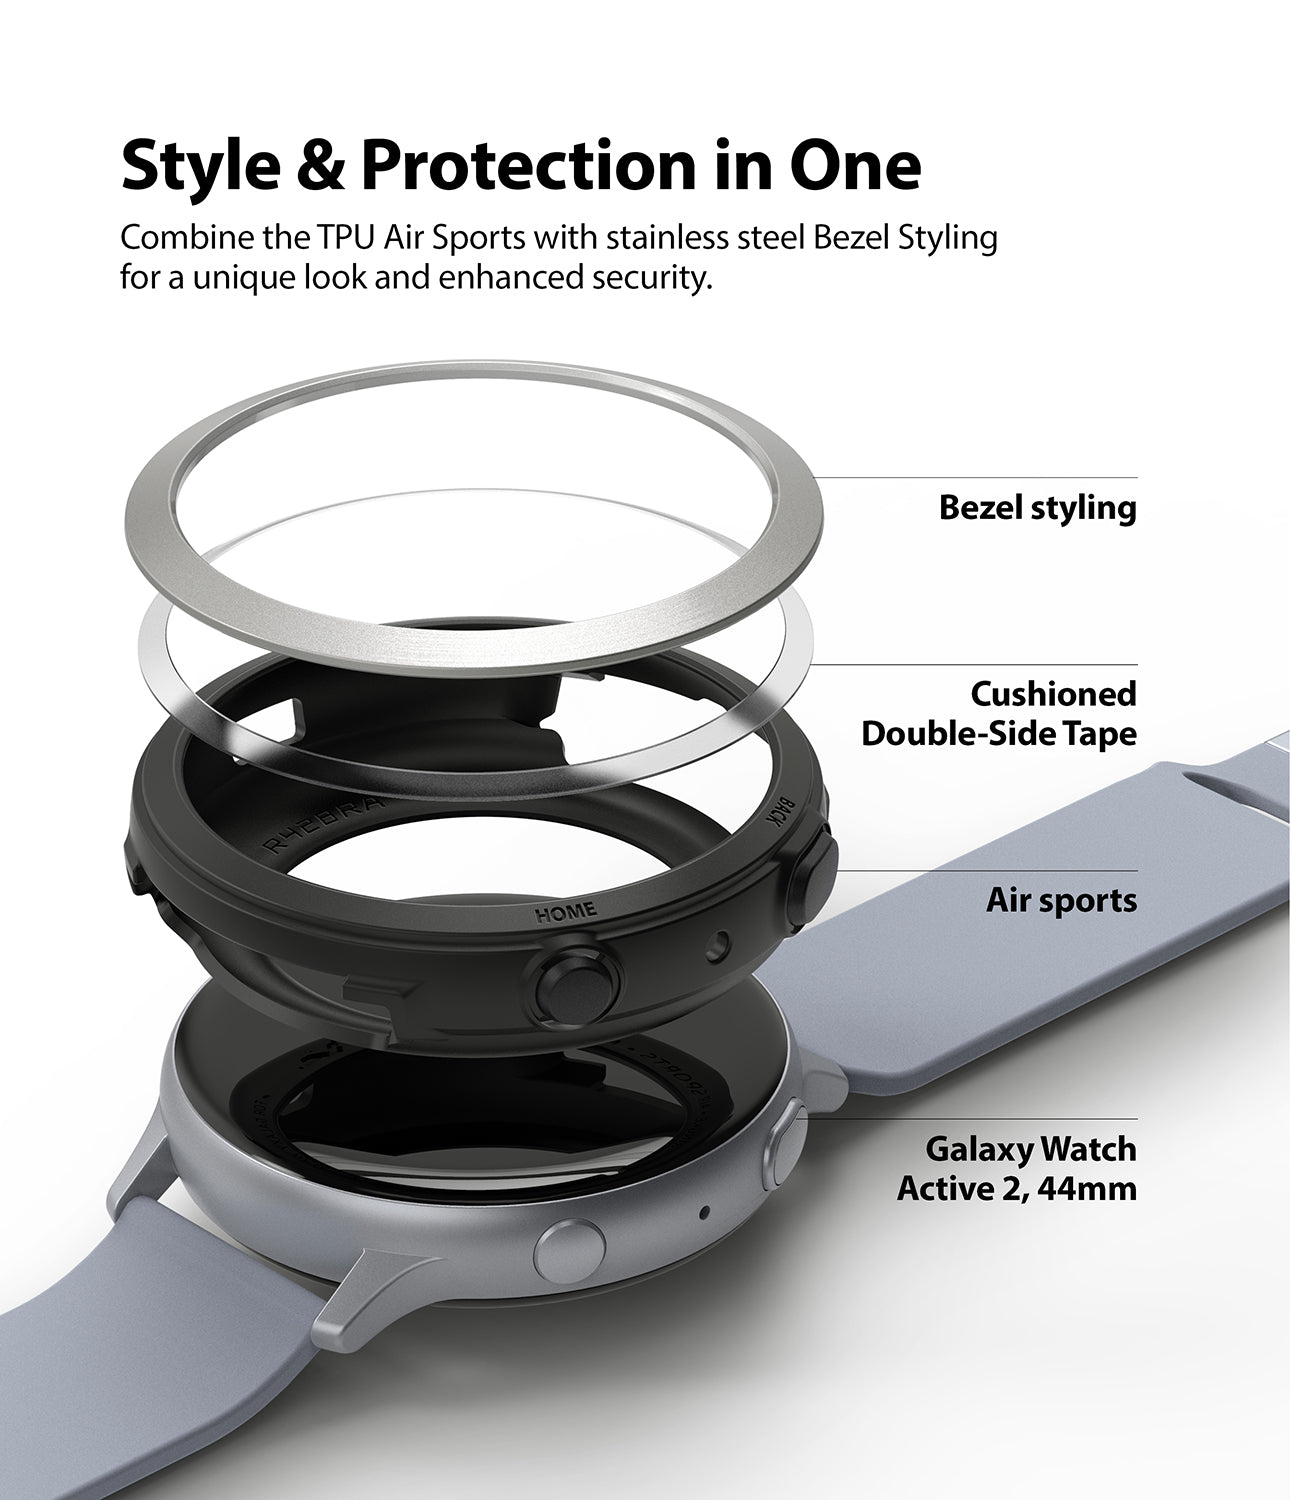 style and protection in one : combine the tpu air sports with stainless steel bezel styling for a unique look and enhanced security